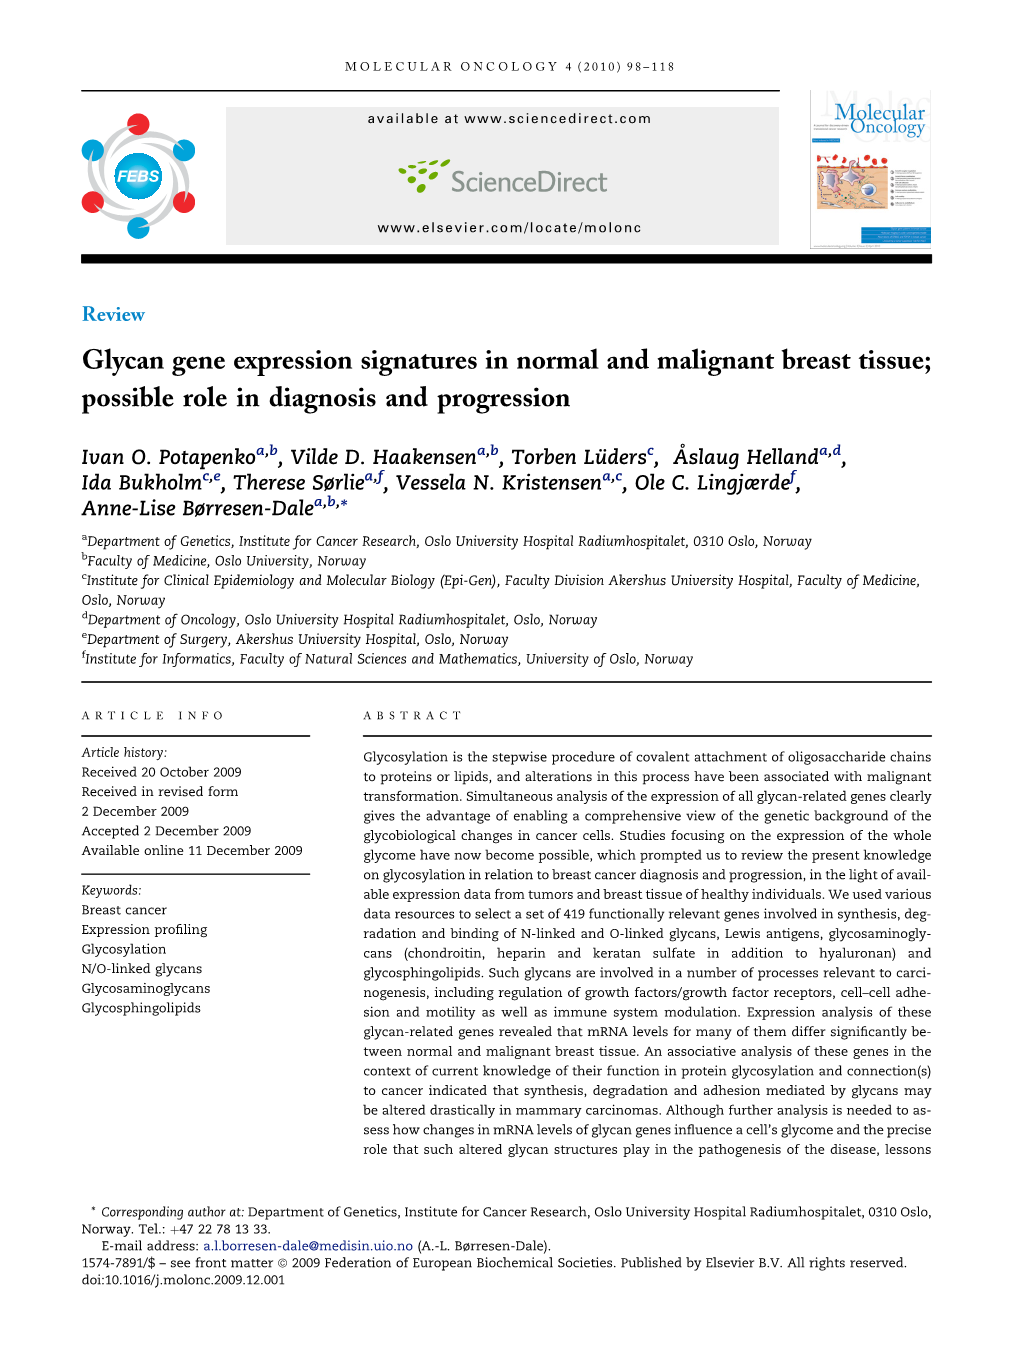 Glycan Gene Expression Signatures in Normal and Malignant Breast Tissue; Possible Role in Diagnosis and Progression